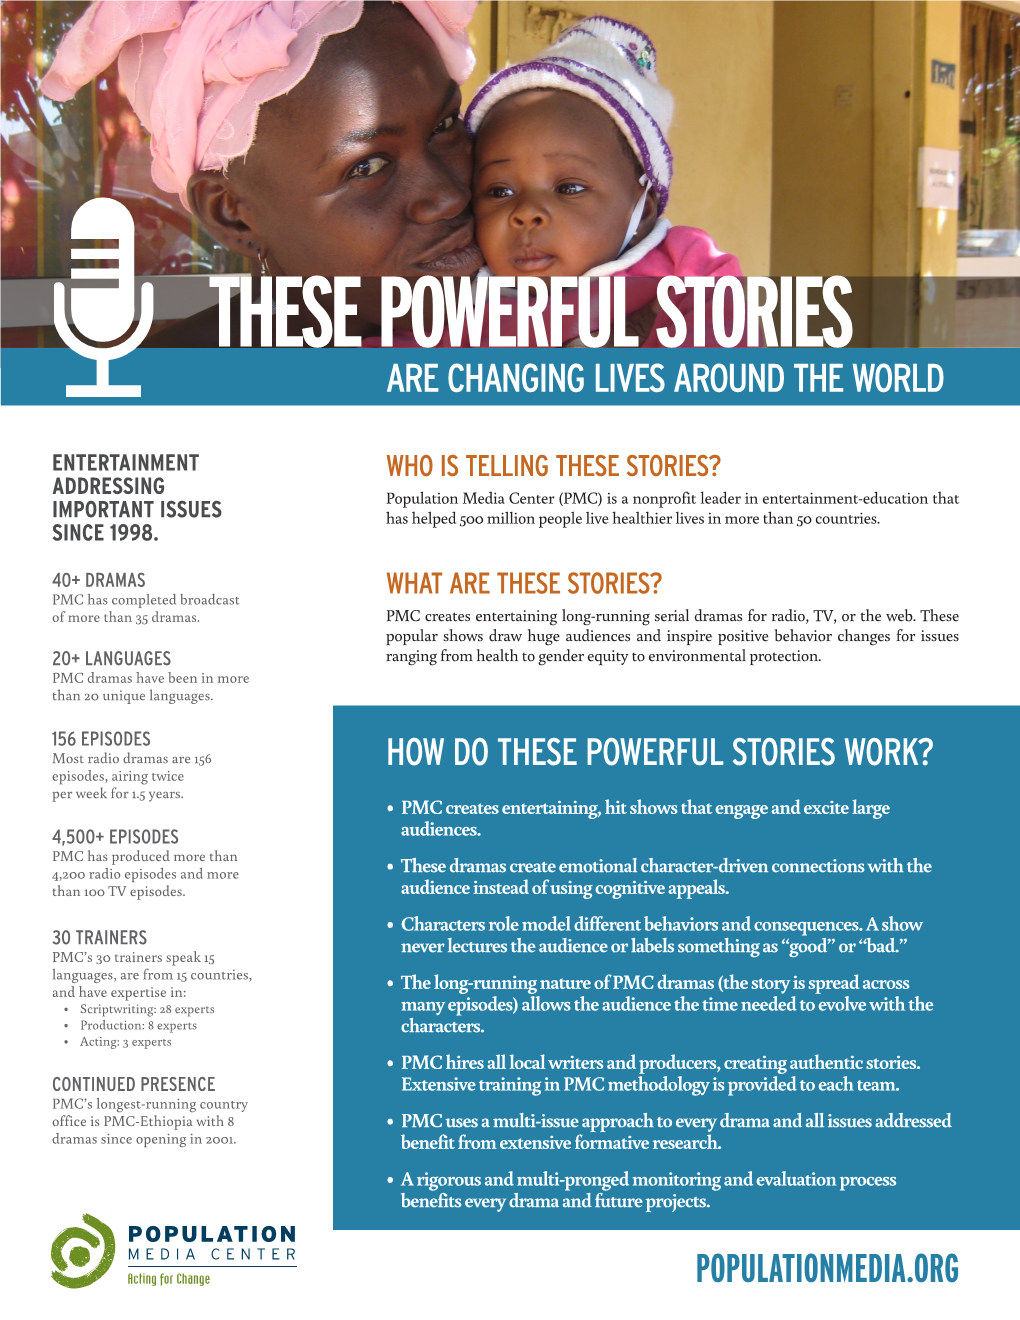 These Powerful Stories Are Changing Lives Around the World